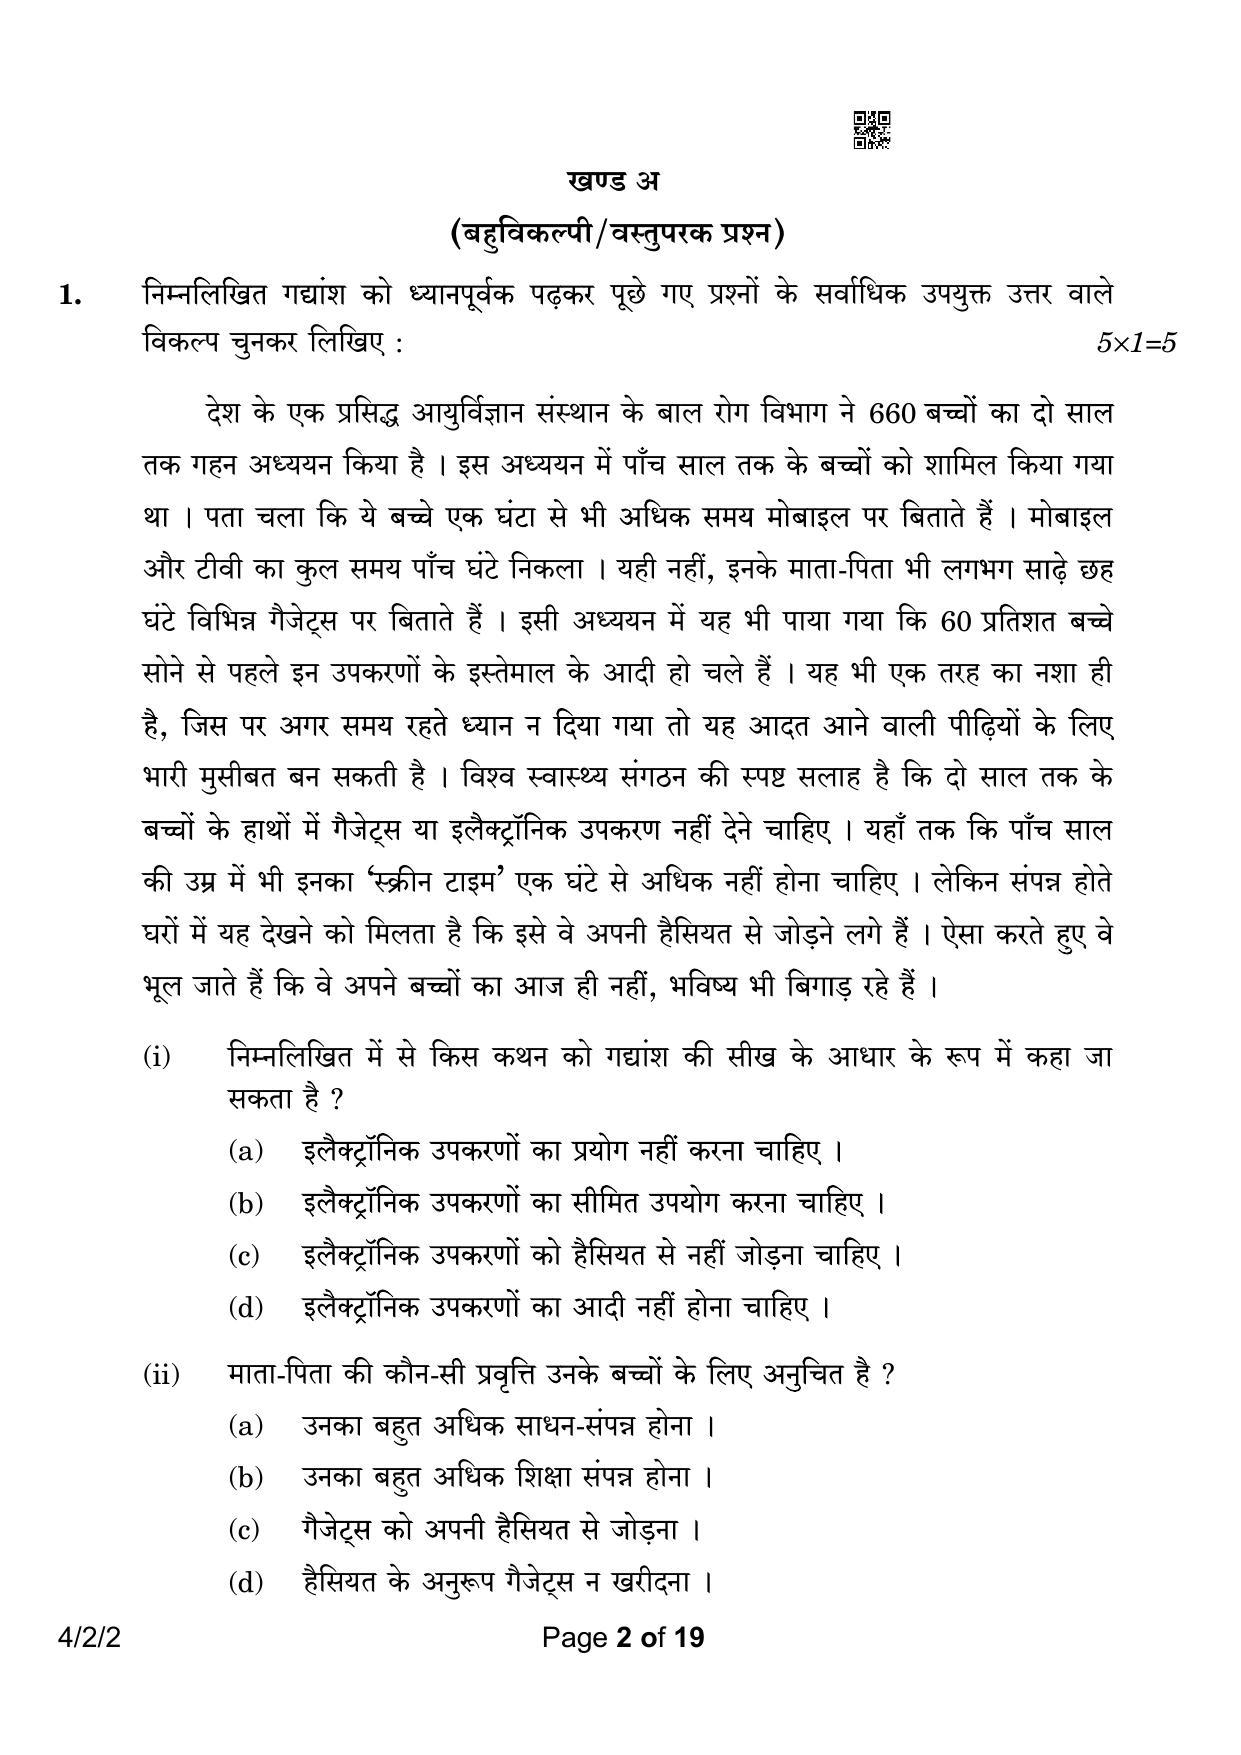 CBSE Class 10 4-2-2 Hindi B 2023 Question Paper - Page 2